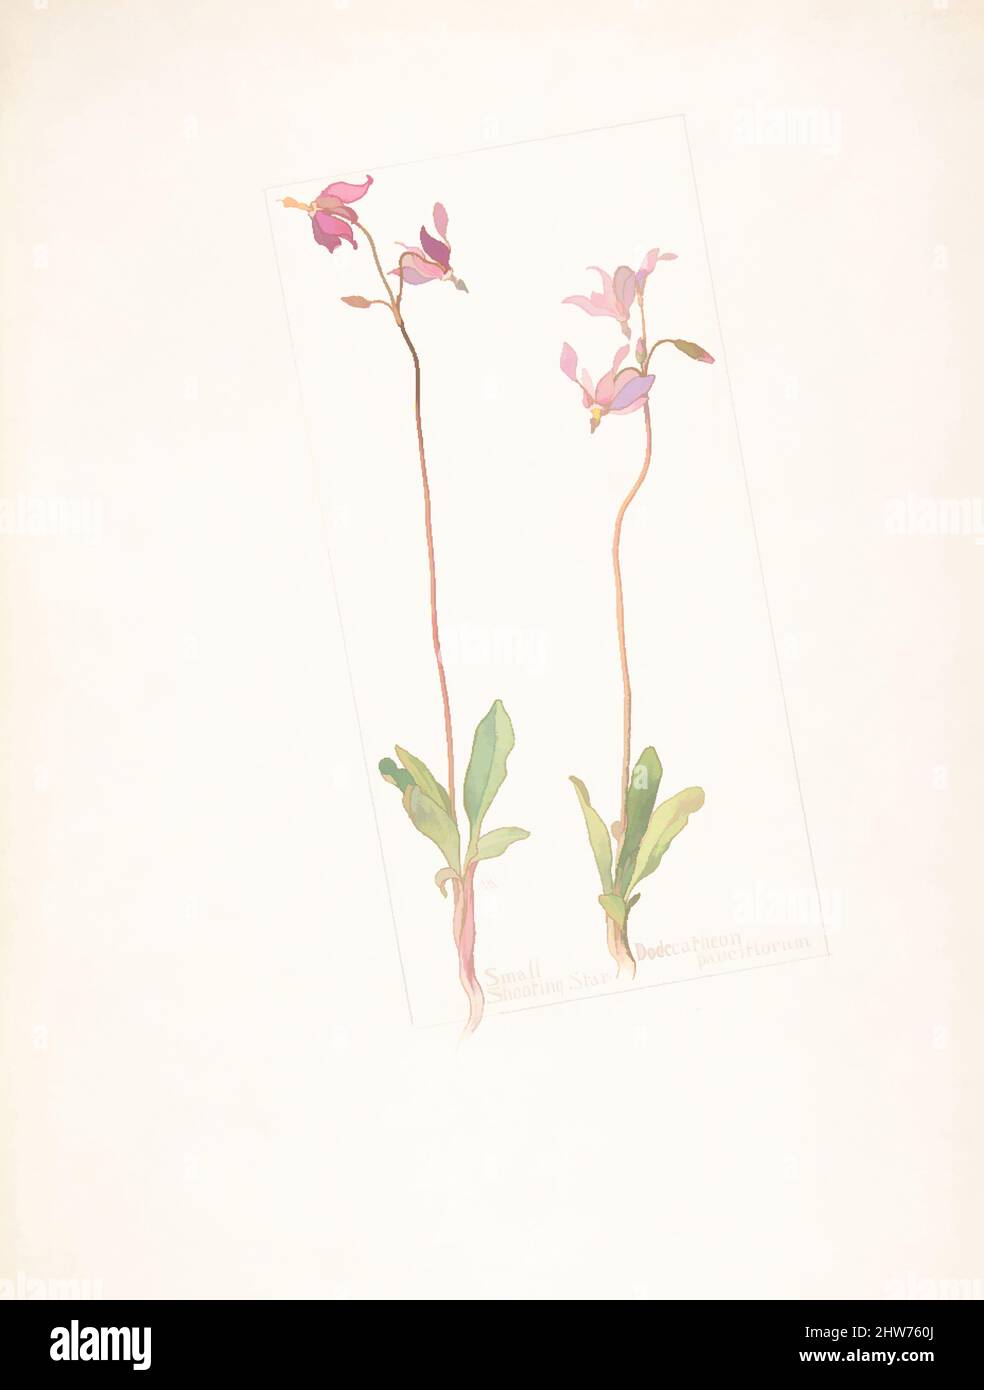 Art inspired by Small Shooting Star, Dodecatheon pauciflorum, Juky, 1909, Watercolor and brown ink over graphite, with page design indicated in graphite, sheet: 13 11/16 x 9 15/16 in. (34.8 x 25.2 cm), Drawings, Margaret Neilson Armstrong (American, New York 1867–1944 New York, Classic works modernized by Artotop with a splash of modernity. Shapes, color and value, eye-catching visual impact on art. Emotions through freedom of artworks in a contemporary way. A timeless message pursuing a wildly creative new direction. Artists turning to the digital medium and creating the Artotop NFT Stock Photo